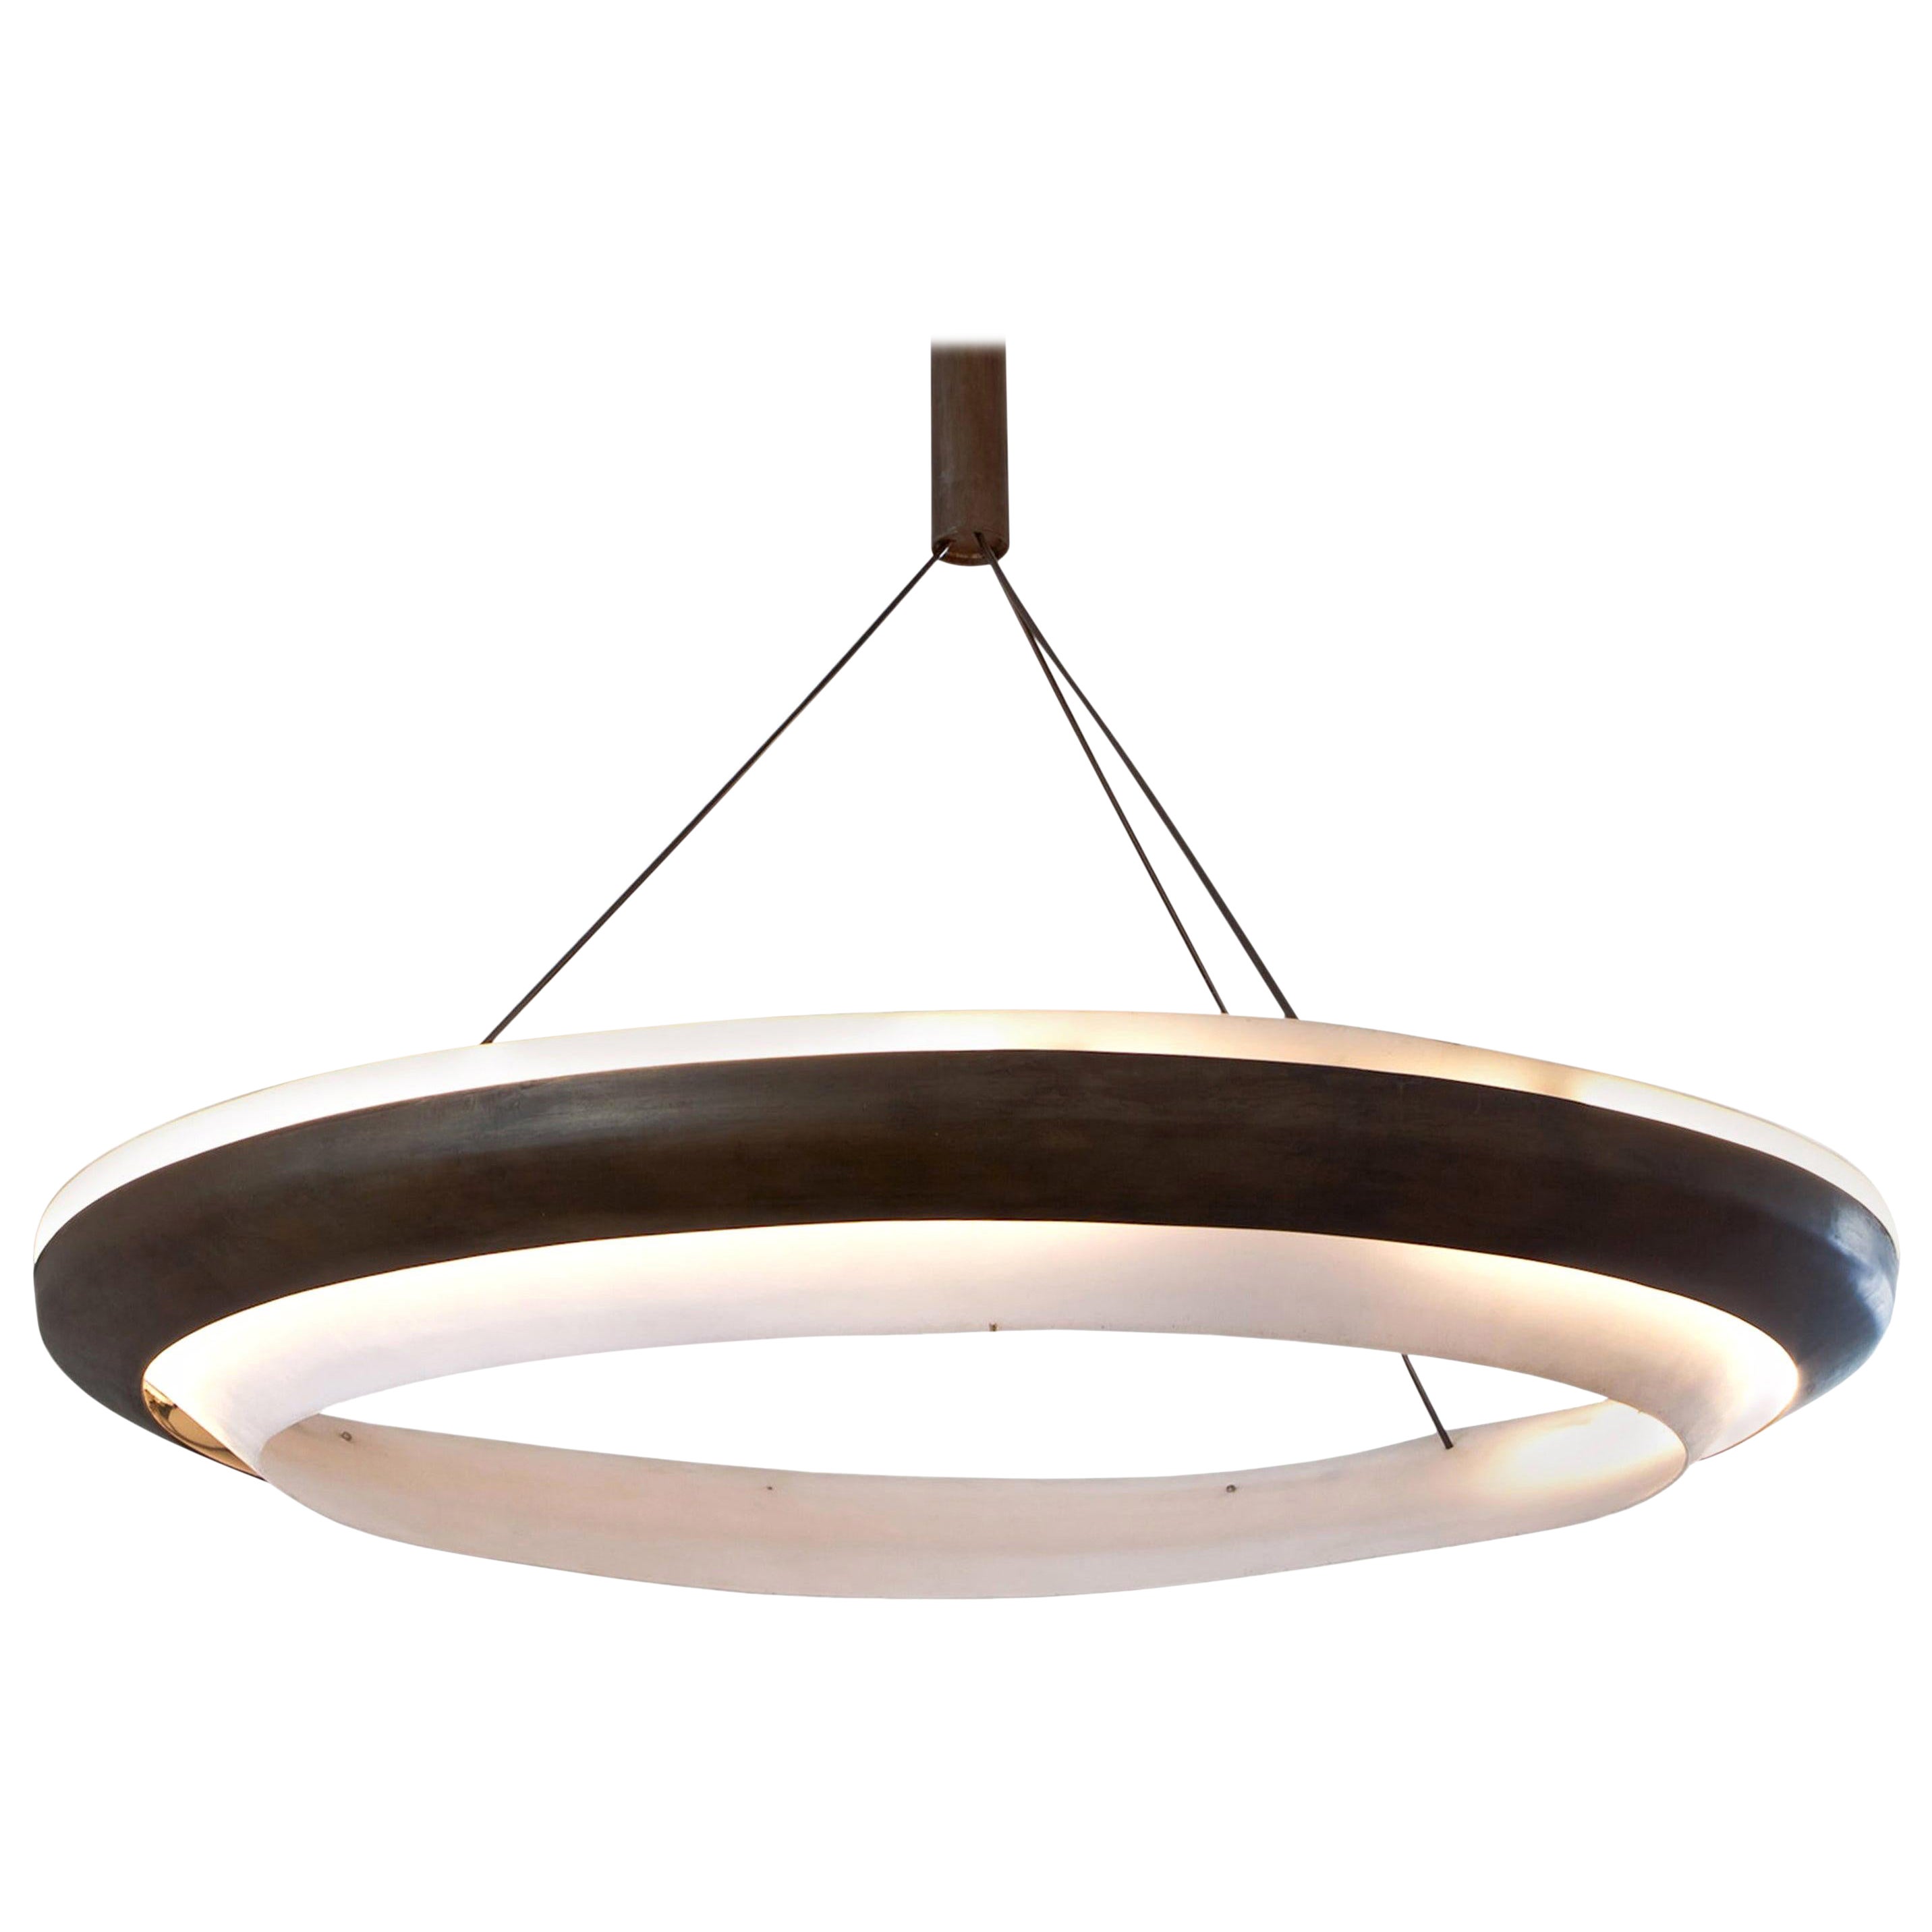 Ring, Chandelier, Chemical Blackened Iron, Polycarbonate, Led Light, 21st Ctry For Sale